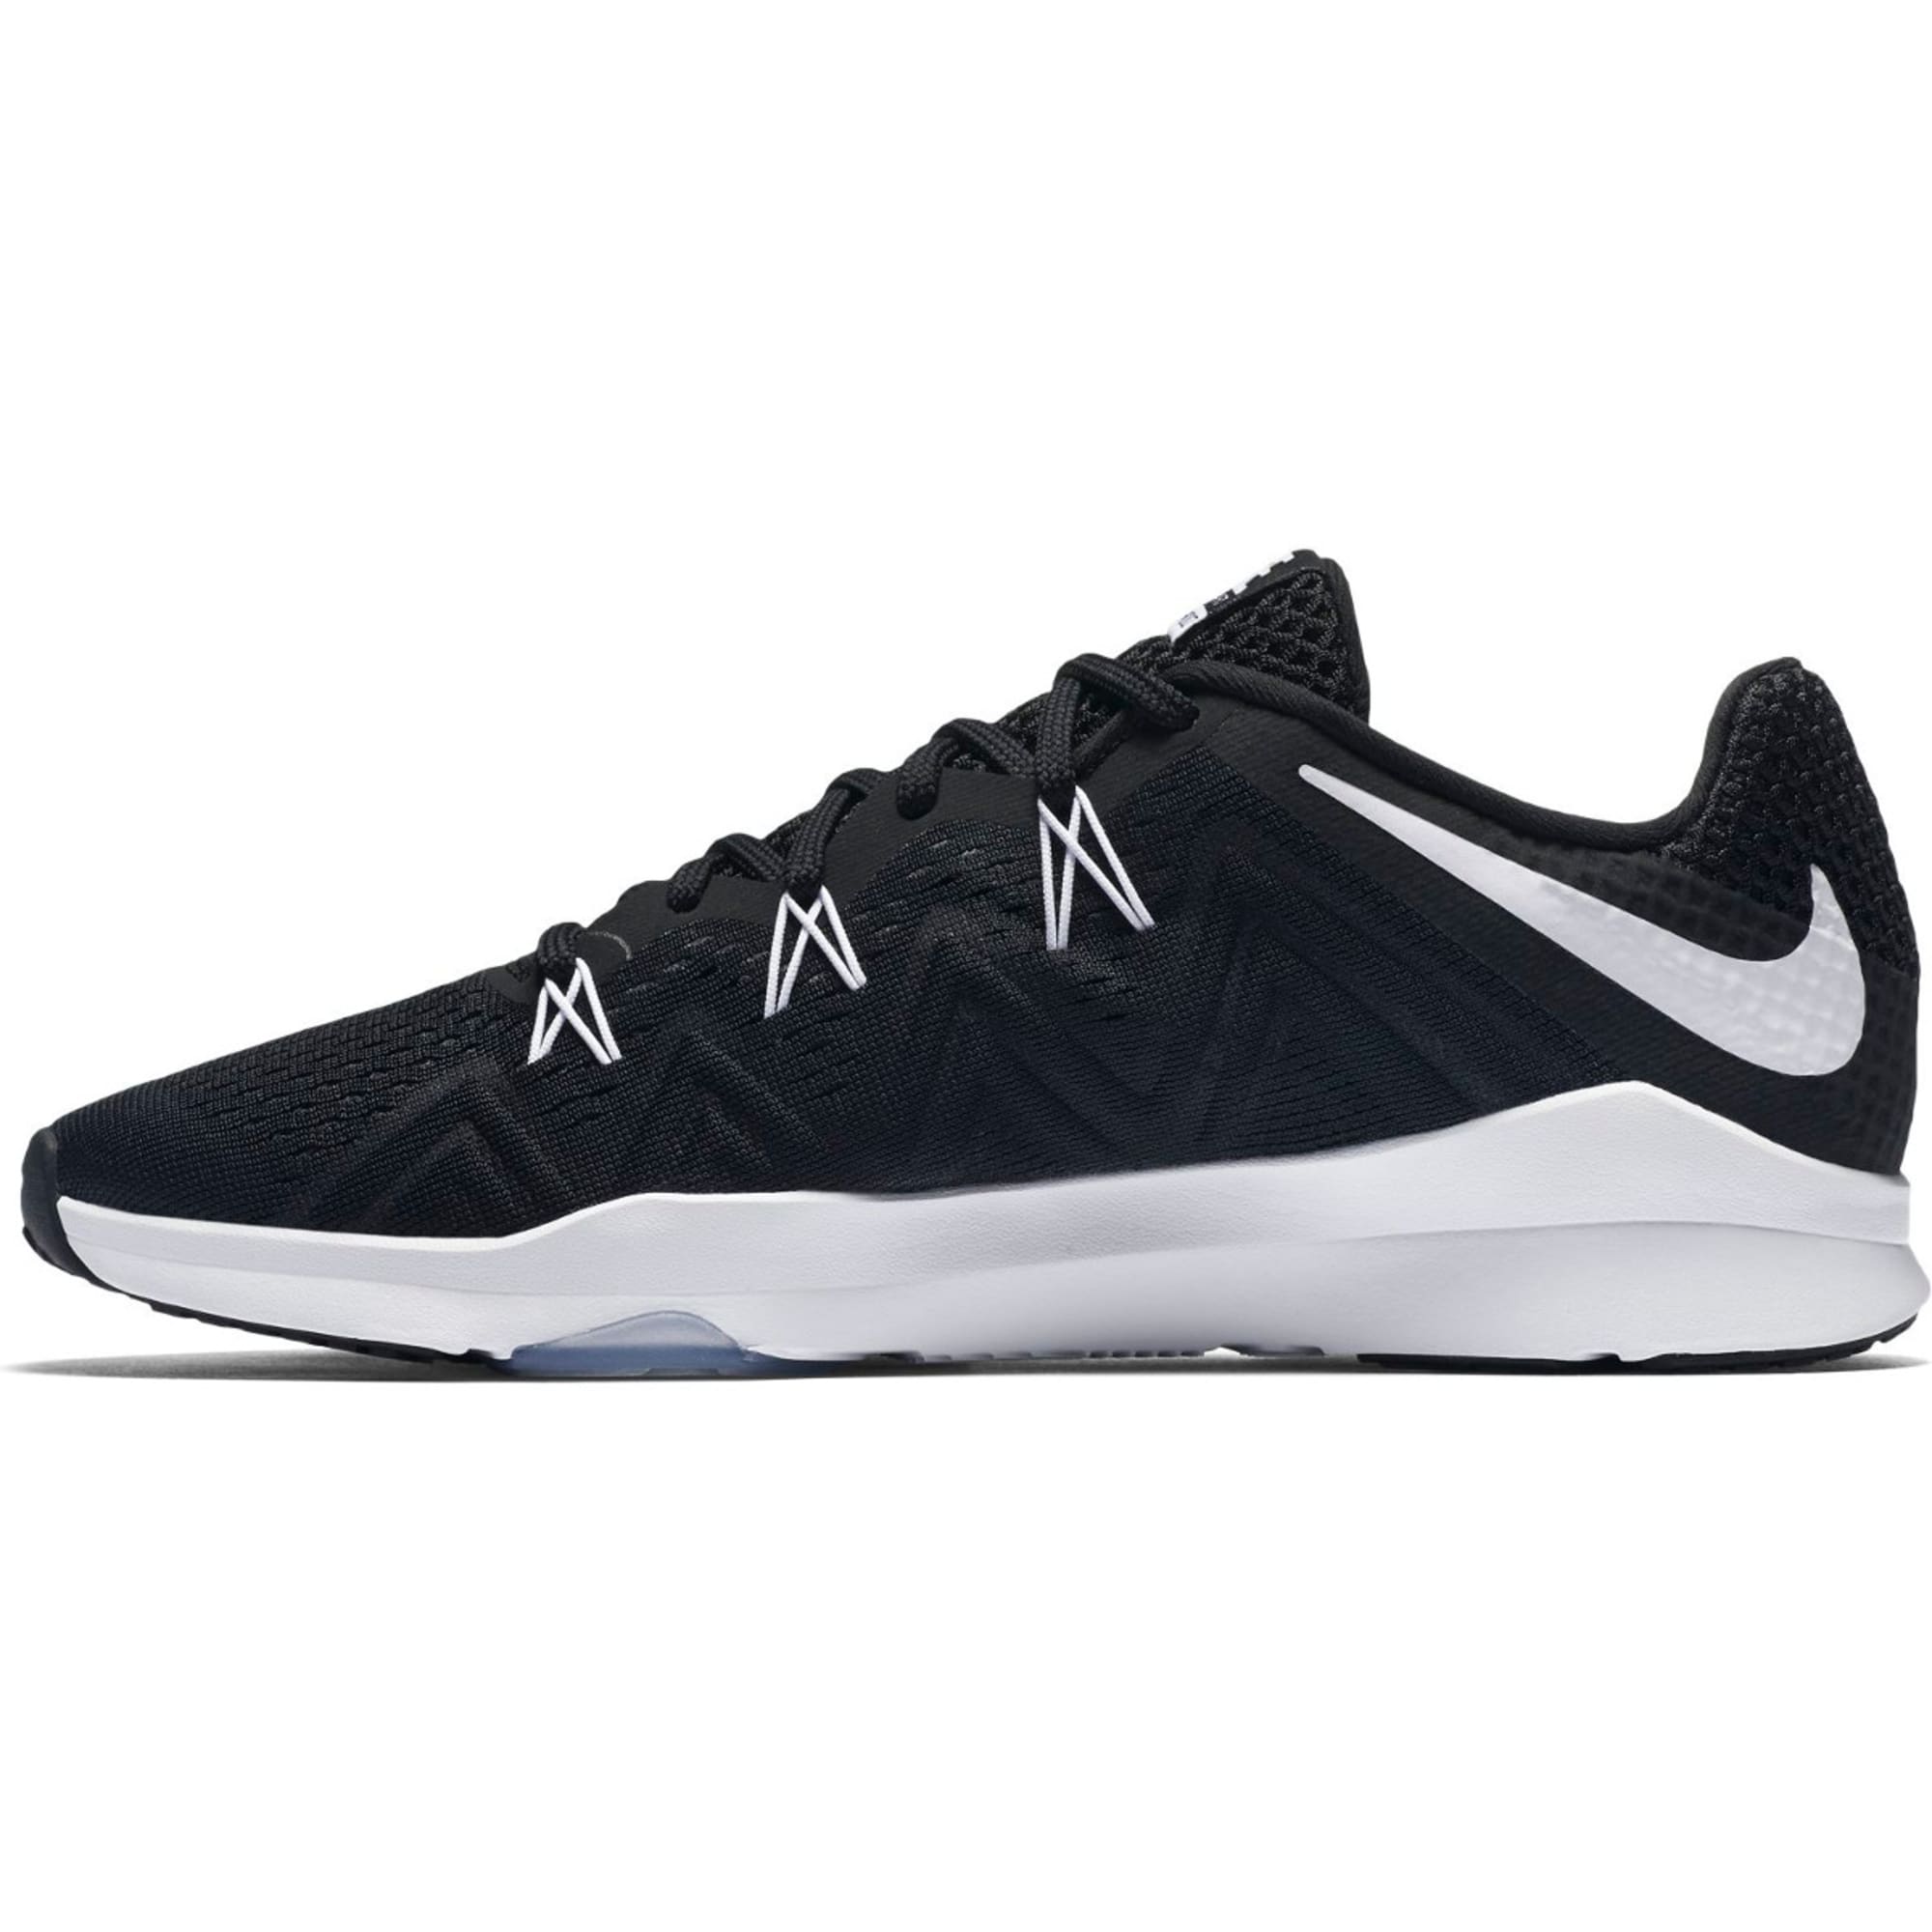 NIKE Women's Zoom Condition TR Training Shoes Stores